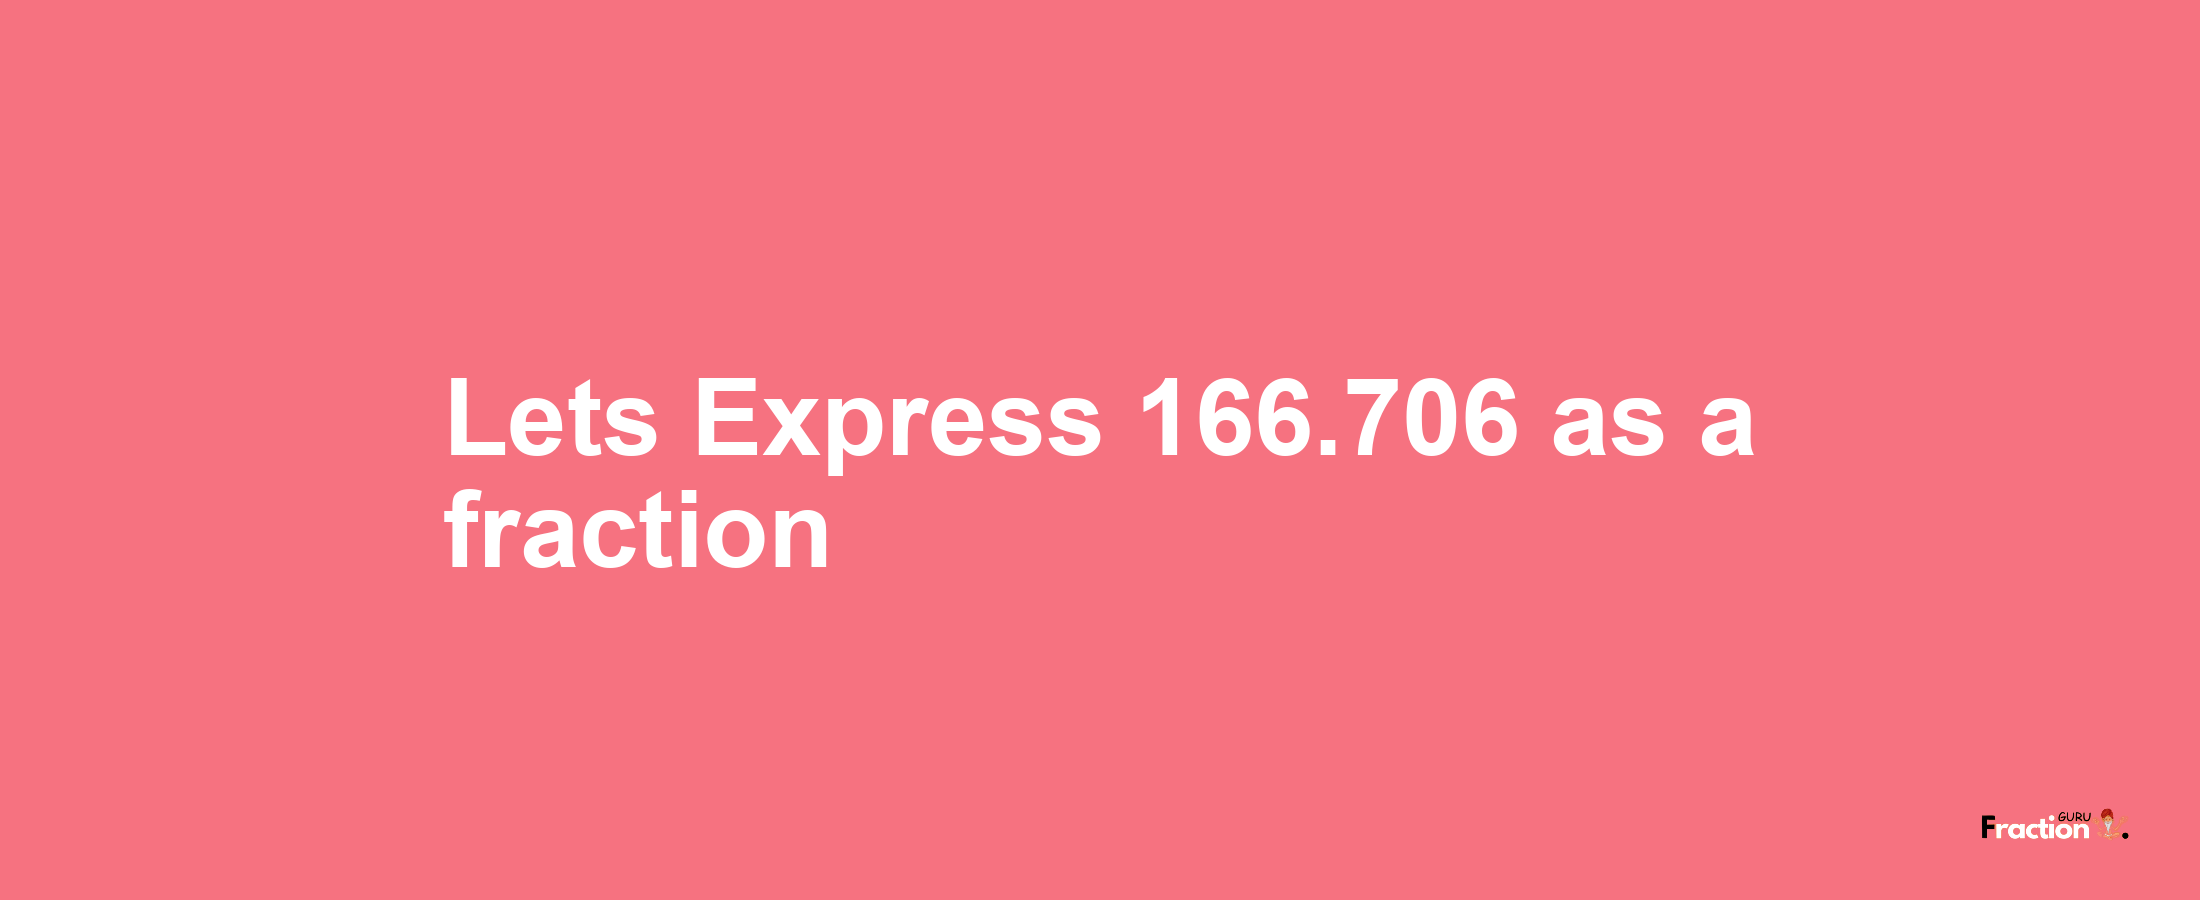 Lets Express 166.706 as afraction